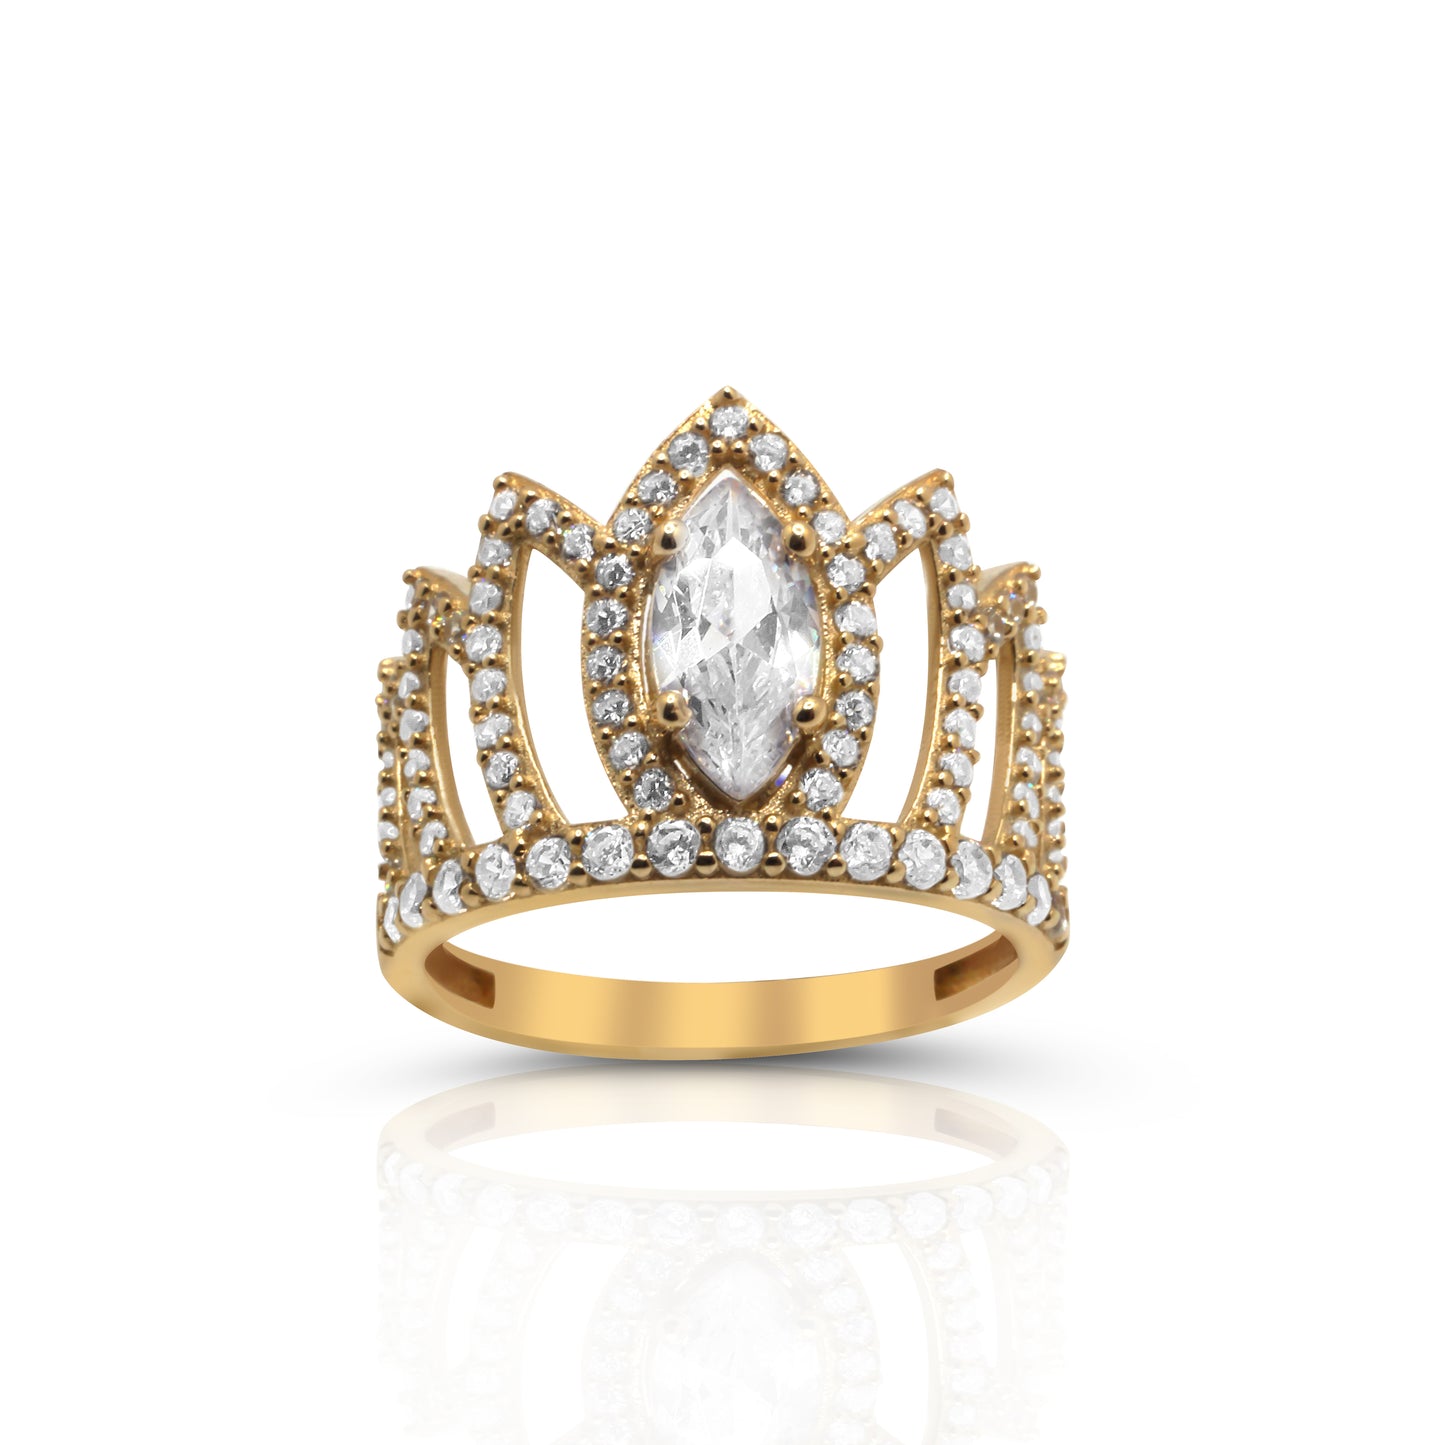 14K Solid Gold Crown Ring with Sparkling CZ Stones